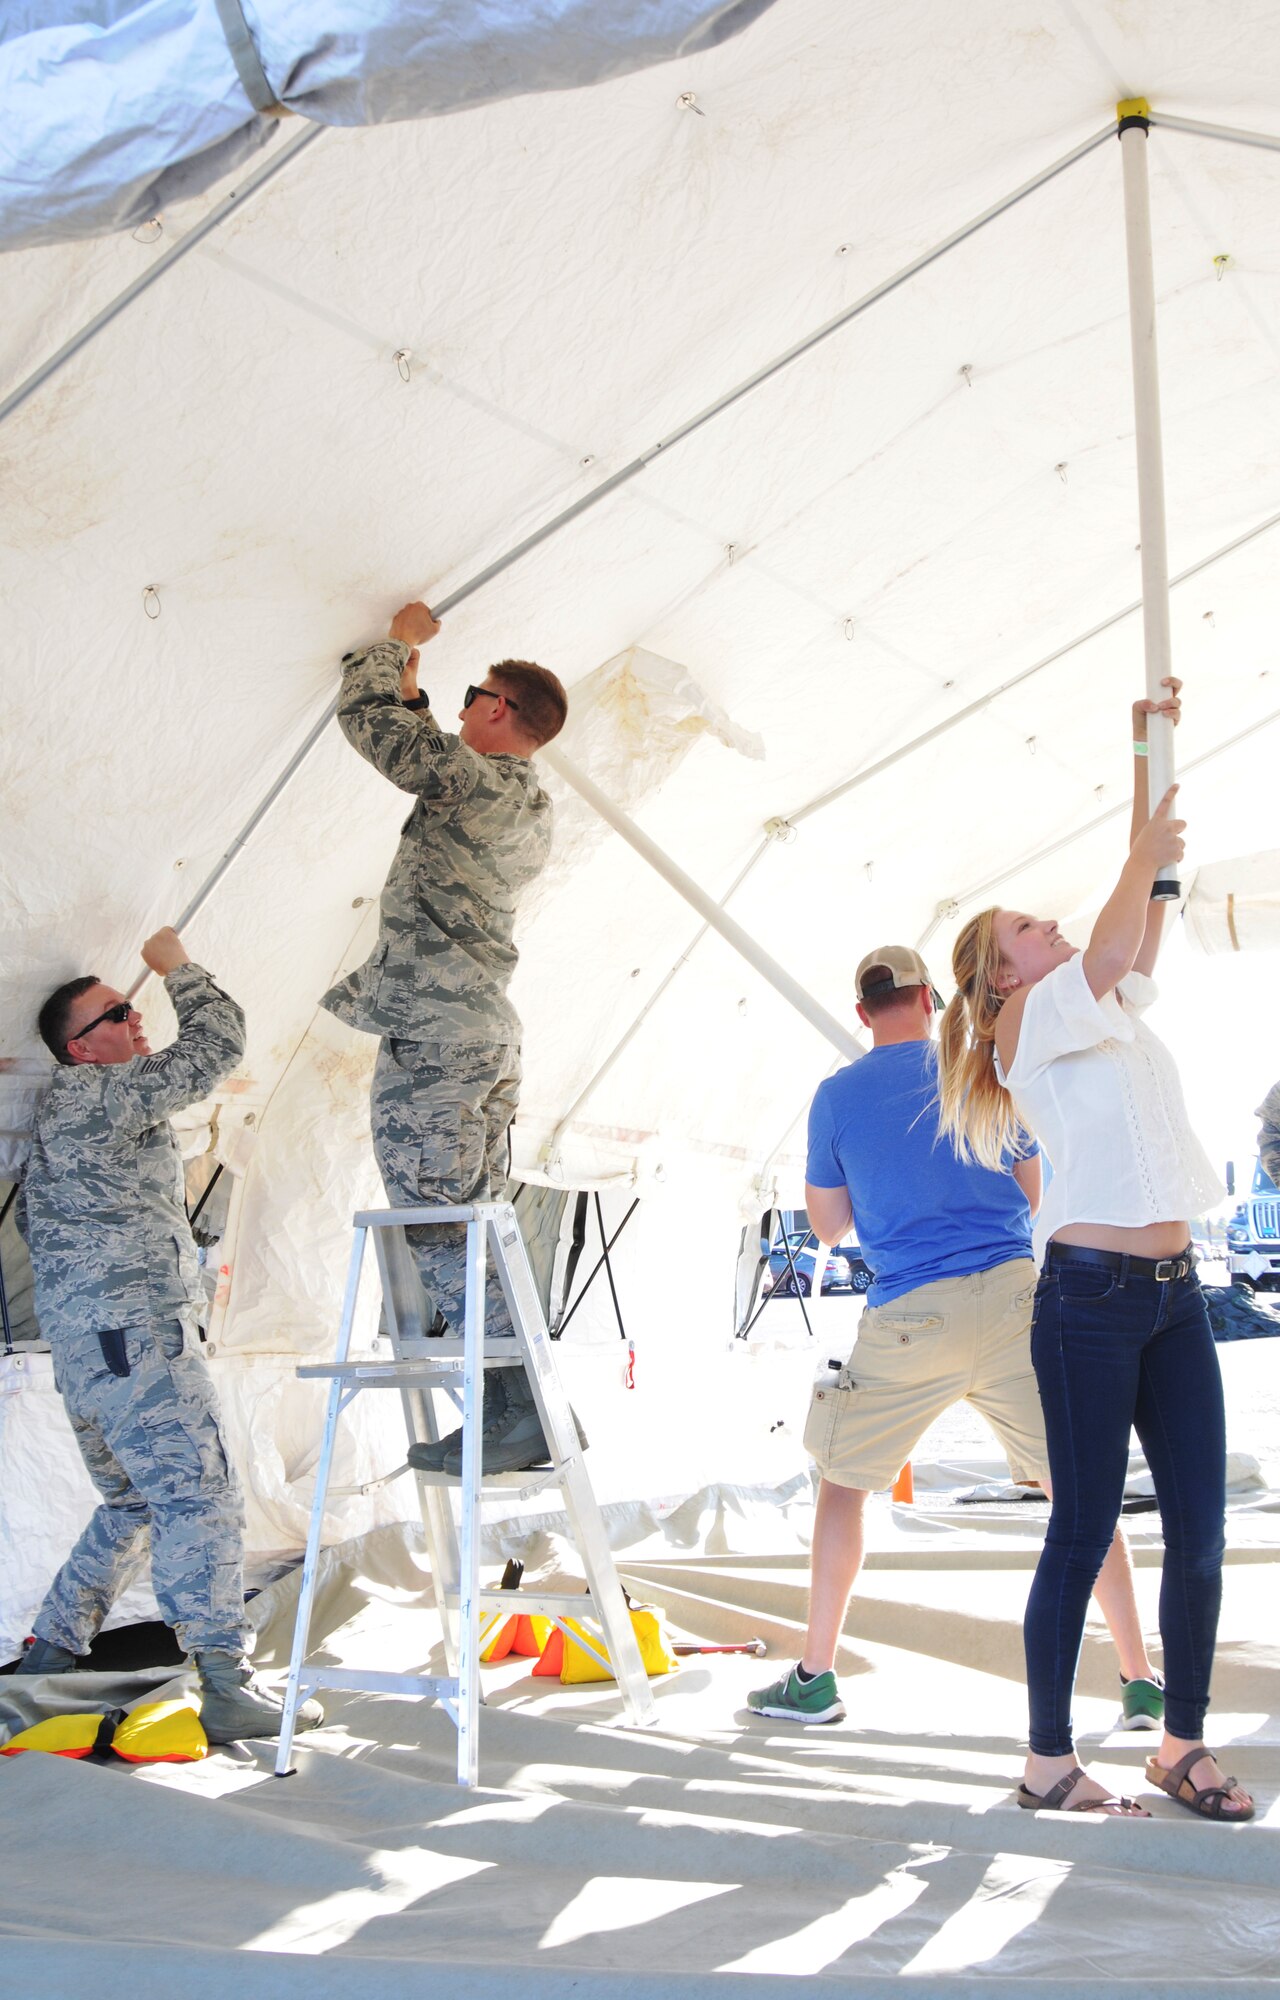 Members of the 142nd Fighter Wing set up a tent used to display historical items as part of the 75th Anniversary of the Oregon Air National Guard during the Oregon International Air Show in Hillsboro, Ore., Aug. 5, 2016. (U.S. Air National Guard photo by Tech. Sgt. John Hughel, 142nd Fighter Wing Public Affairs/Released).